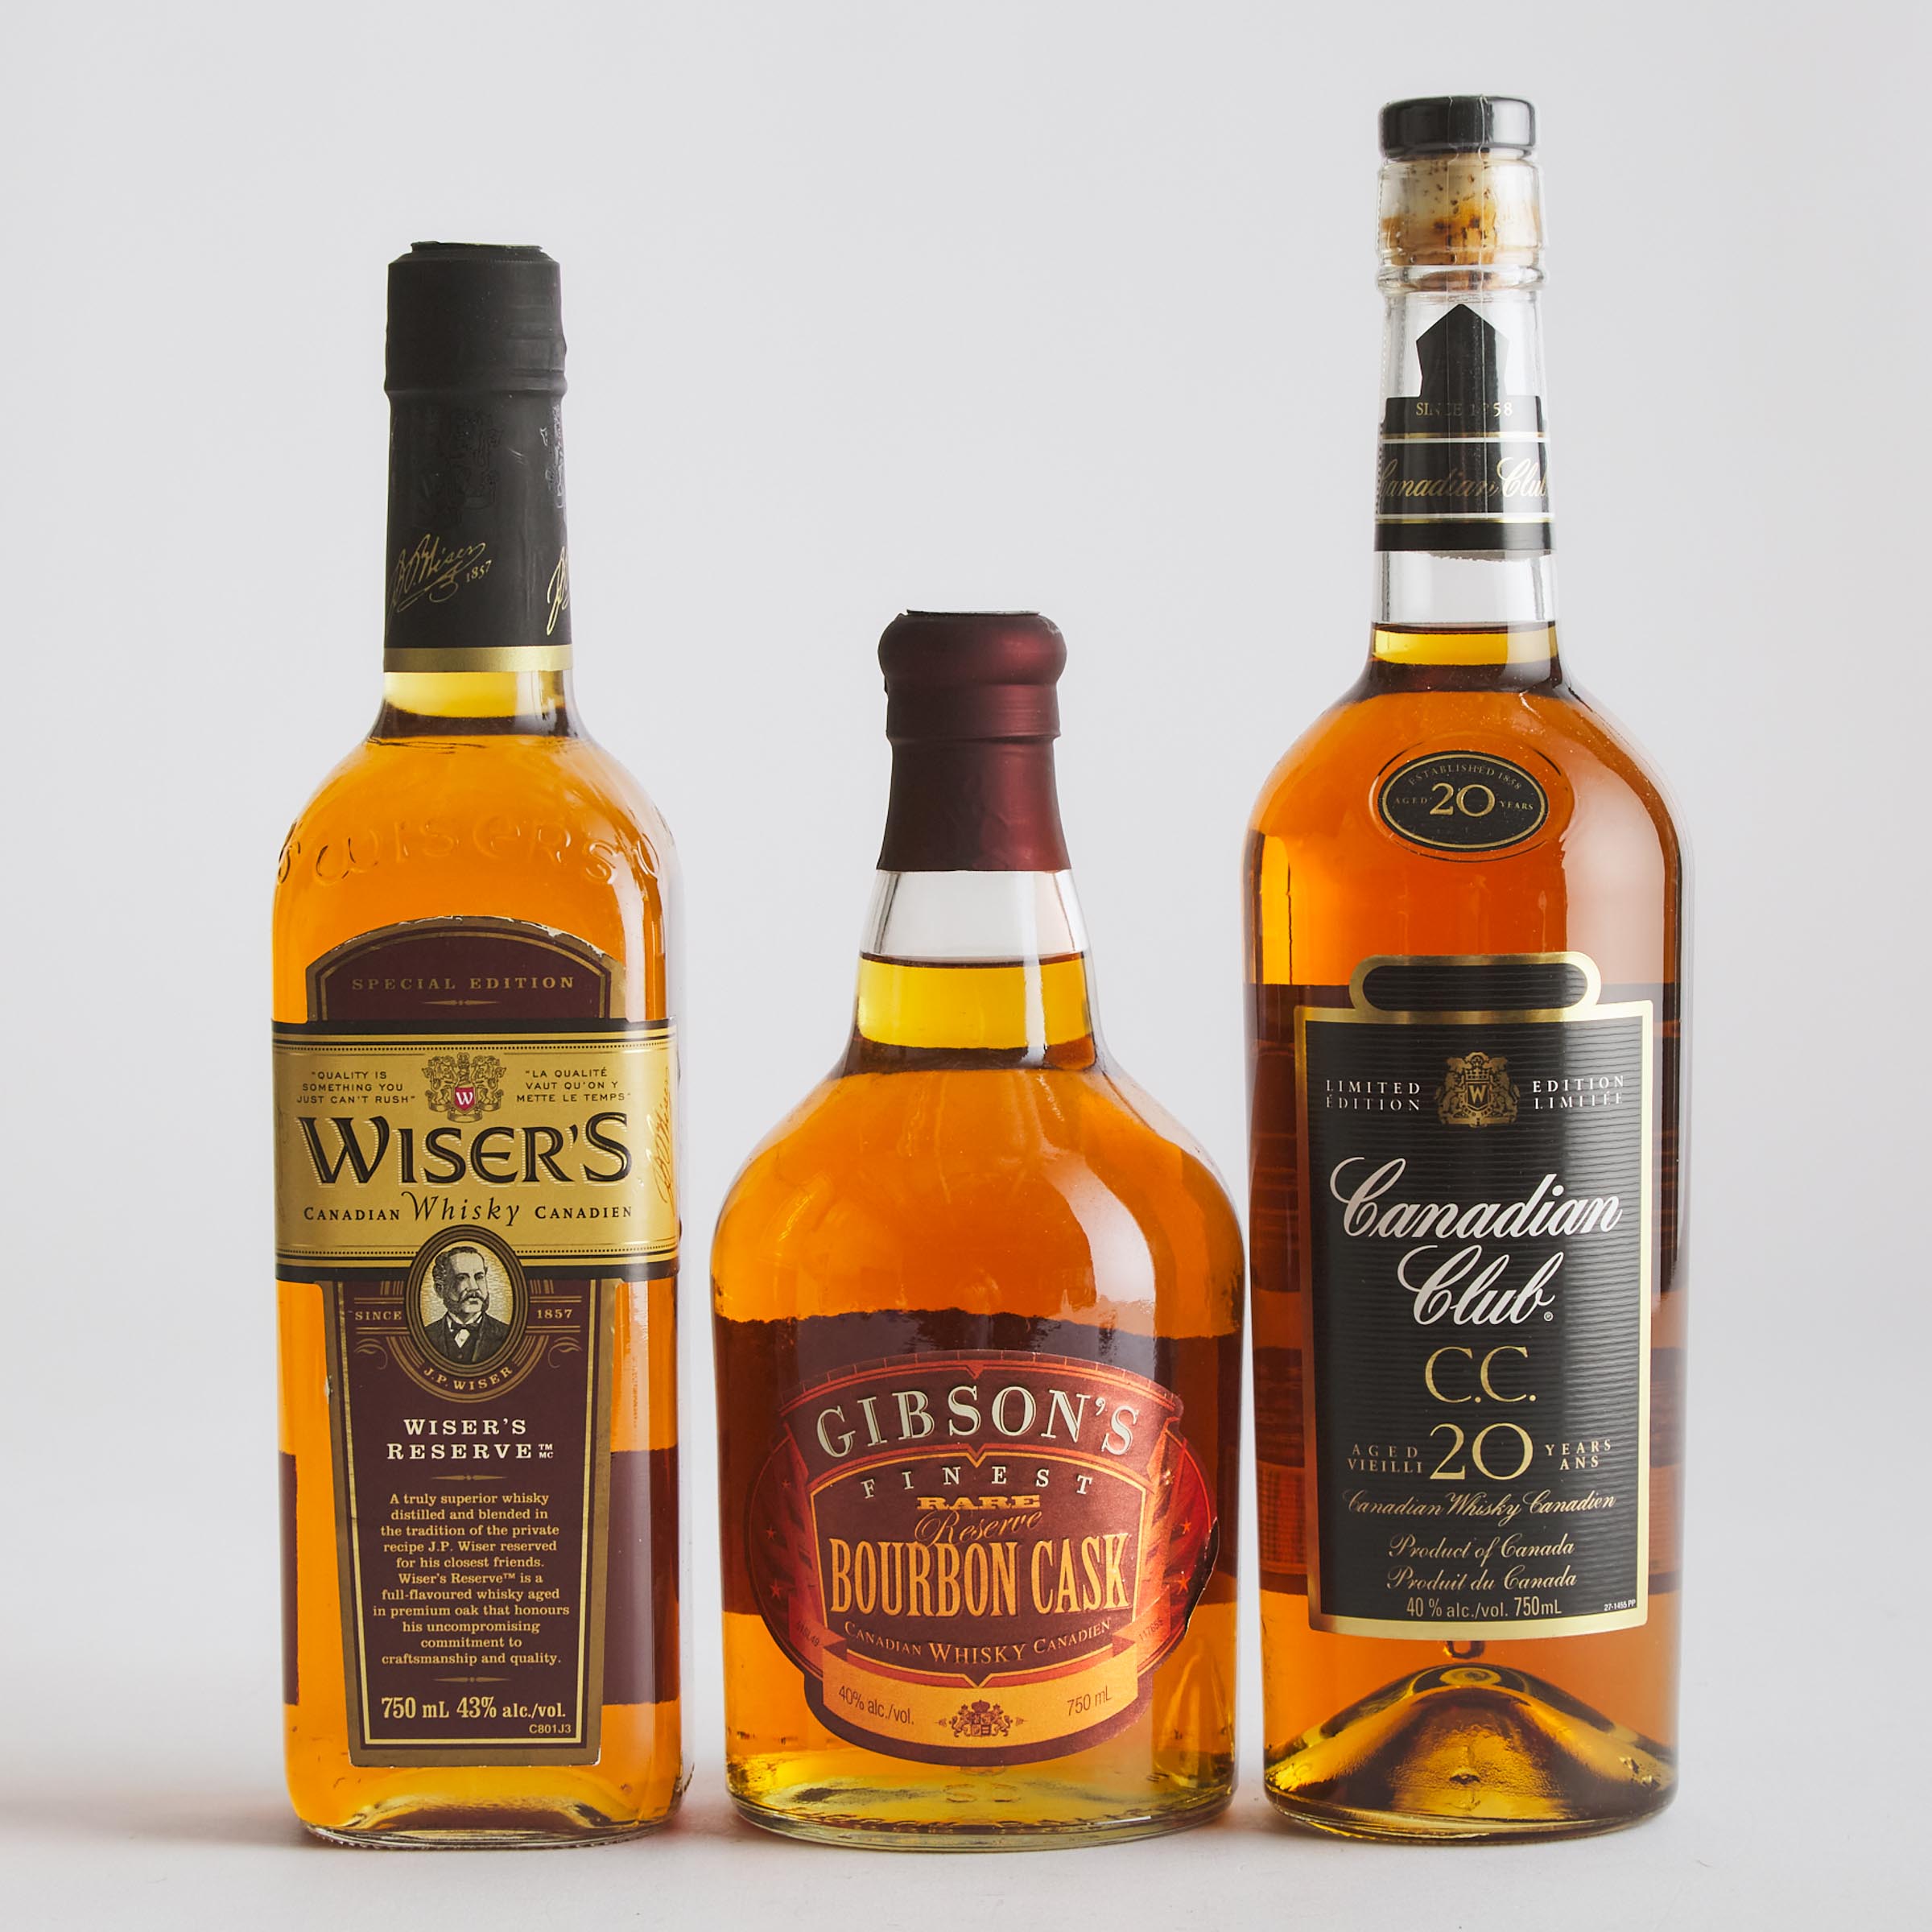 CANADIAN CLUB CANADIAN WHISKY 20 YEARS (ONE 750 ML)
GIBSON'S FINEST CANADIAN WHISKY (ONE 750 ML)
J.P. WISER'S RESERVE CANADIAN WHISKY (ONE 750 ML)